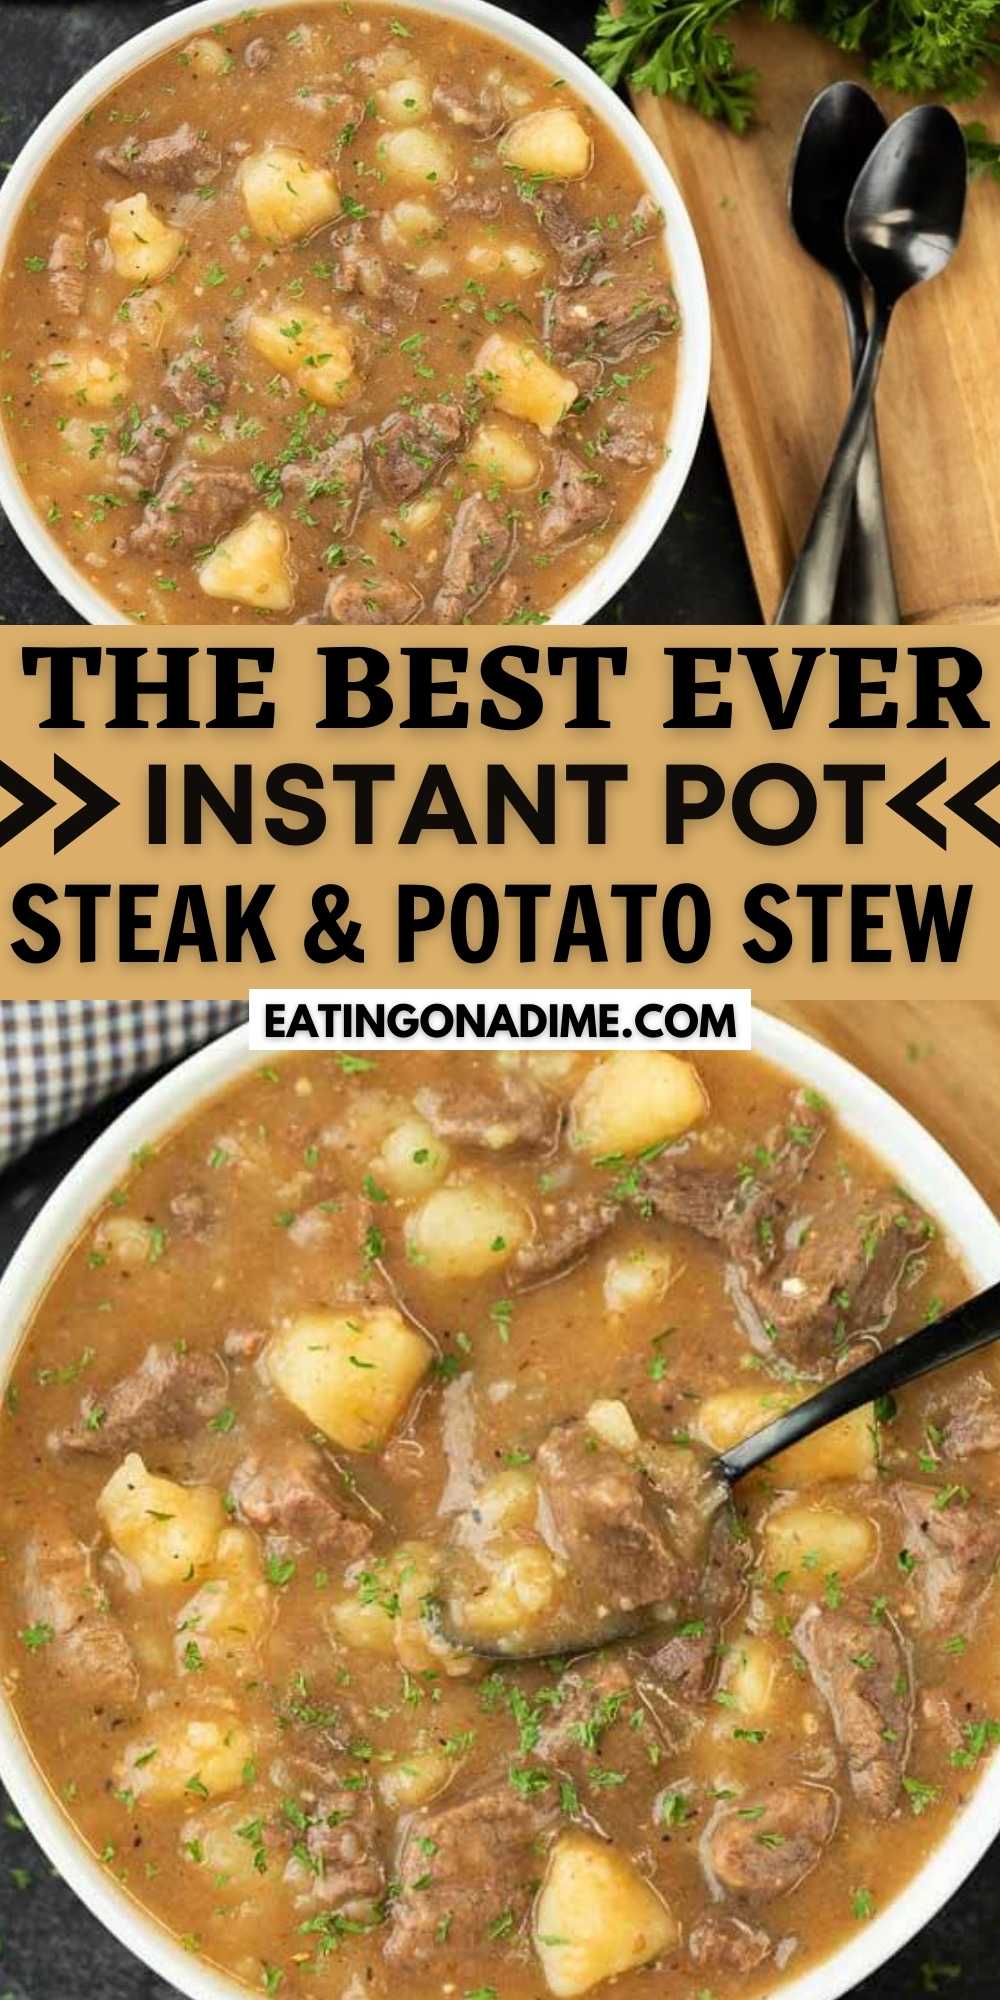 The Best Instant pot Steak and Potatoes Beef Stew recipe. This Beef stew with potatoes is so tender. Try this easy Steak and Potatoes stew. This electric pressure cooker steak beef stew recipes is easy to make and tastes amazing too!  #eatingonadime #instantpotrecipes #beefrecipes #stewrecipes 
